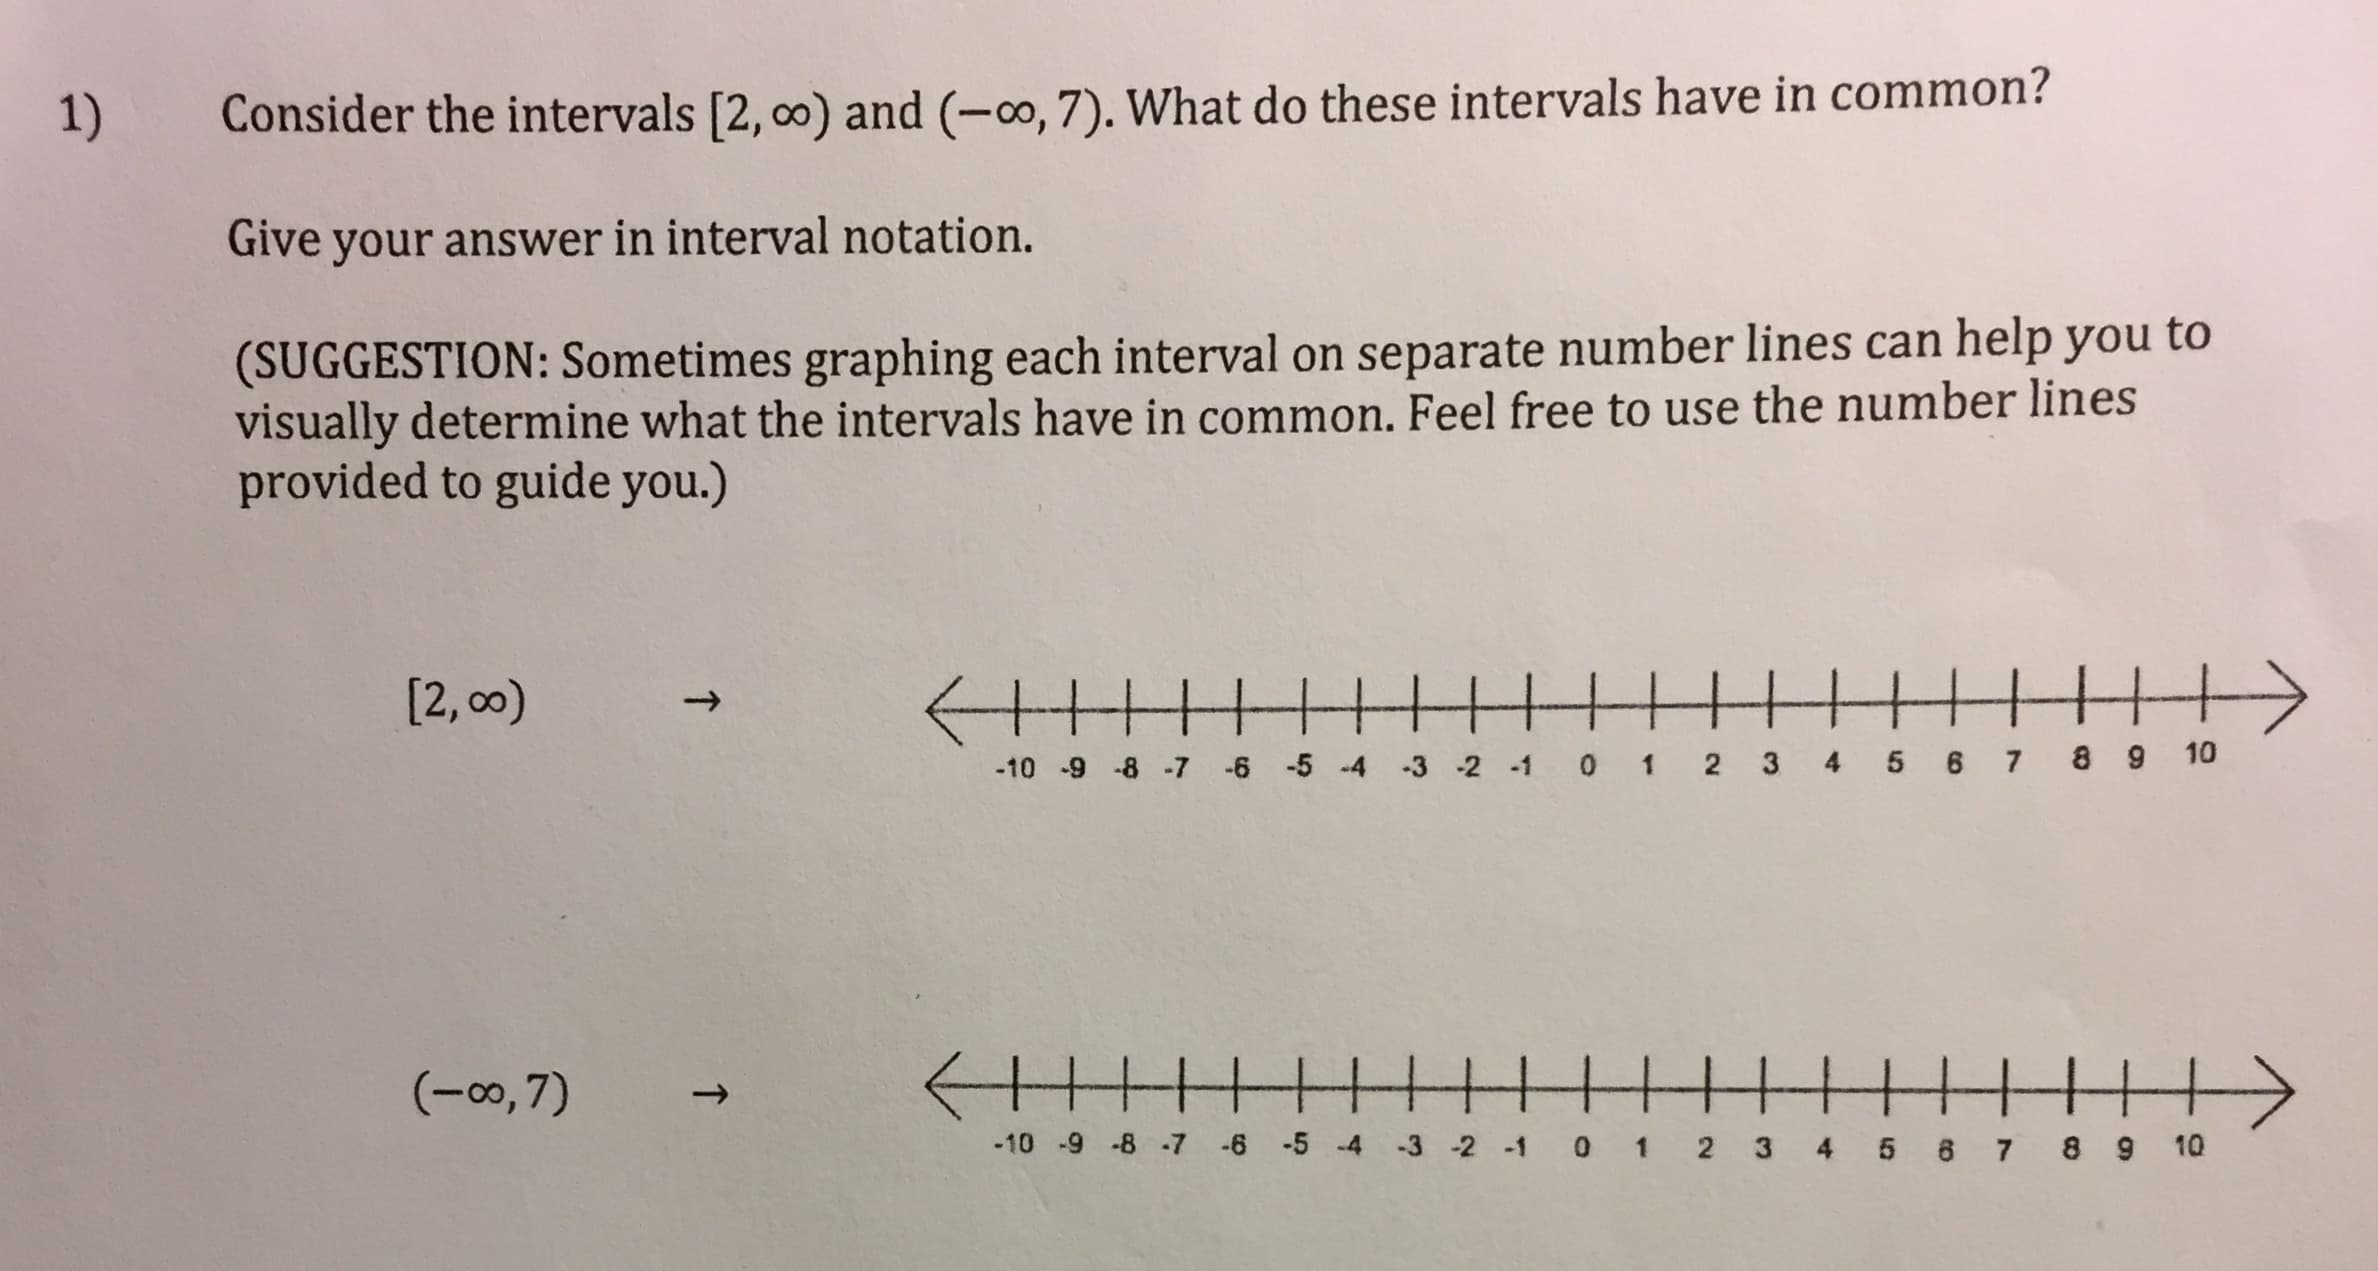 Consider the intervals [2, 00) and (-0, 7). What do these intervals have in common?
1)
Give your answer in interval notation.
(SUGGESTION: Sometimes graphing each interval on separate number lines can help you to
visually determine what the intervals have in common. Feel free to use the number lines
provided to guide you.)
|||+
[2, 00)
-6 -5 -4 -3 -2 -1 0 1 2 3 4 5 6 7 8 9 10
-10 -9 -8 -7
(-0, 7)
-10 -9 -8 -7 -6 -5 -4 -3 -2 -1 0 1 2 3 4 5 8 7 8 9 10
